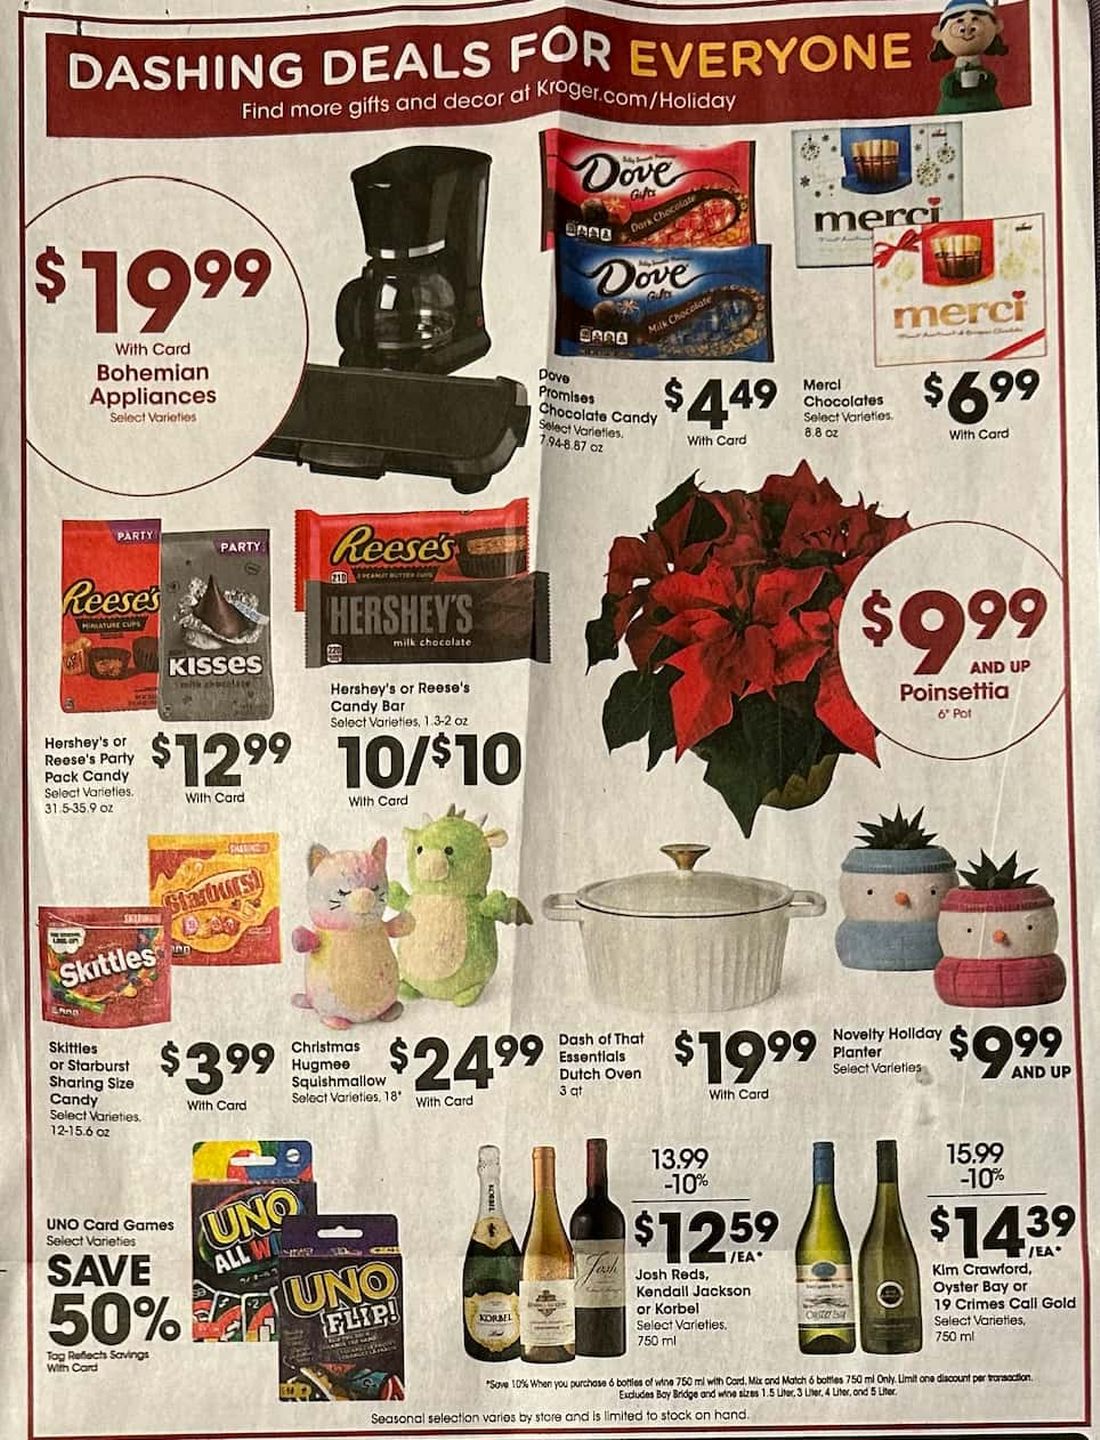 Kroger Black Friday July 2024 Weekly Sales, Deals, Discounts and Digital Coupons.